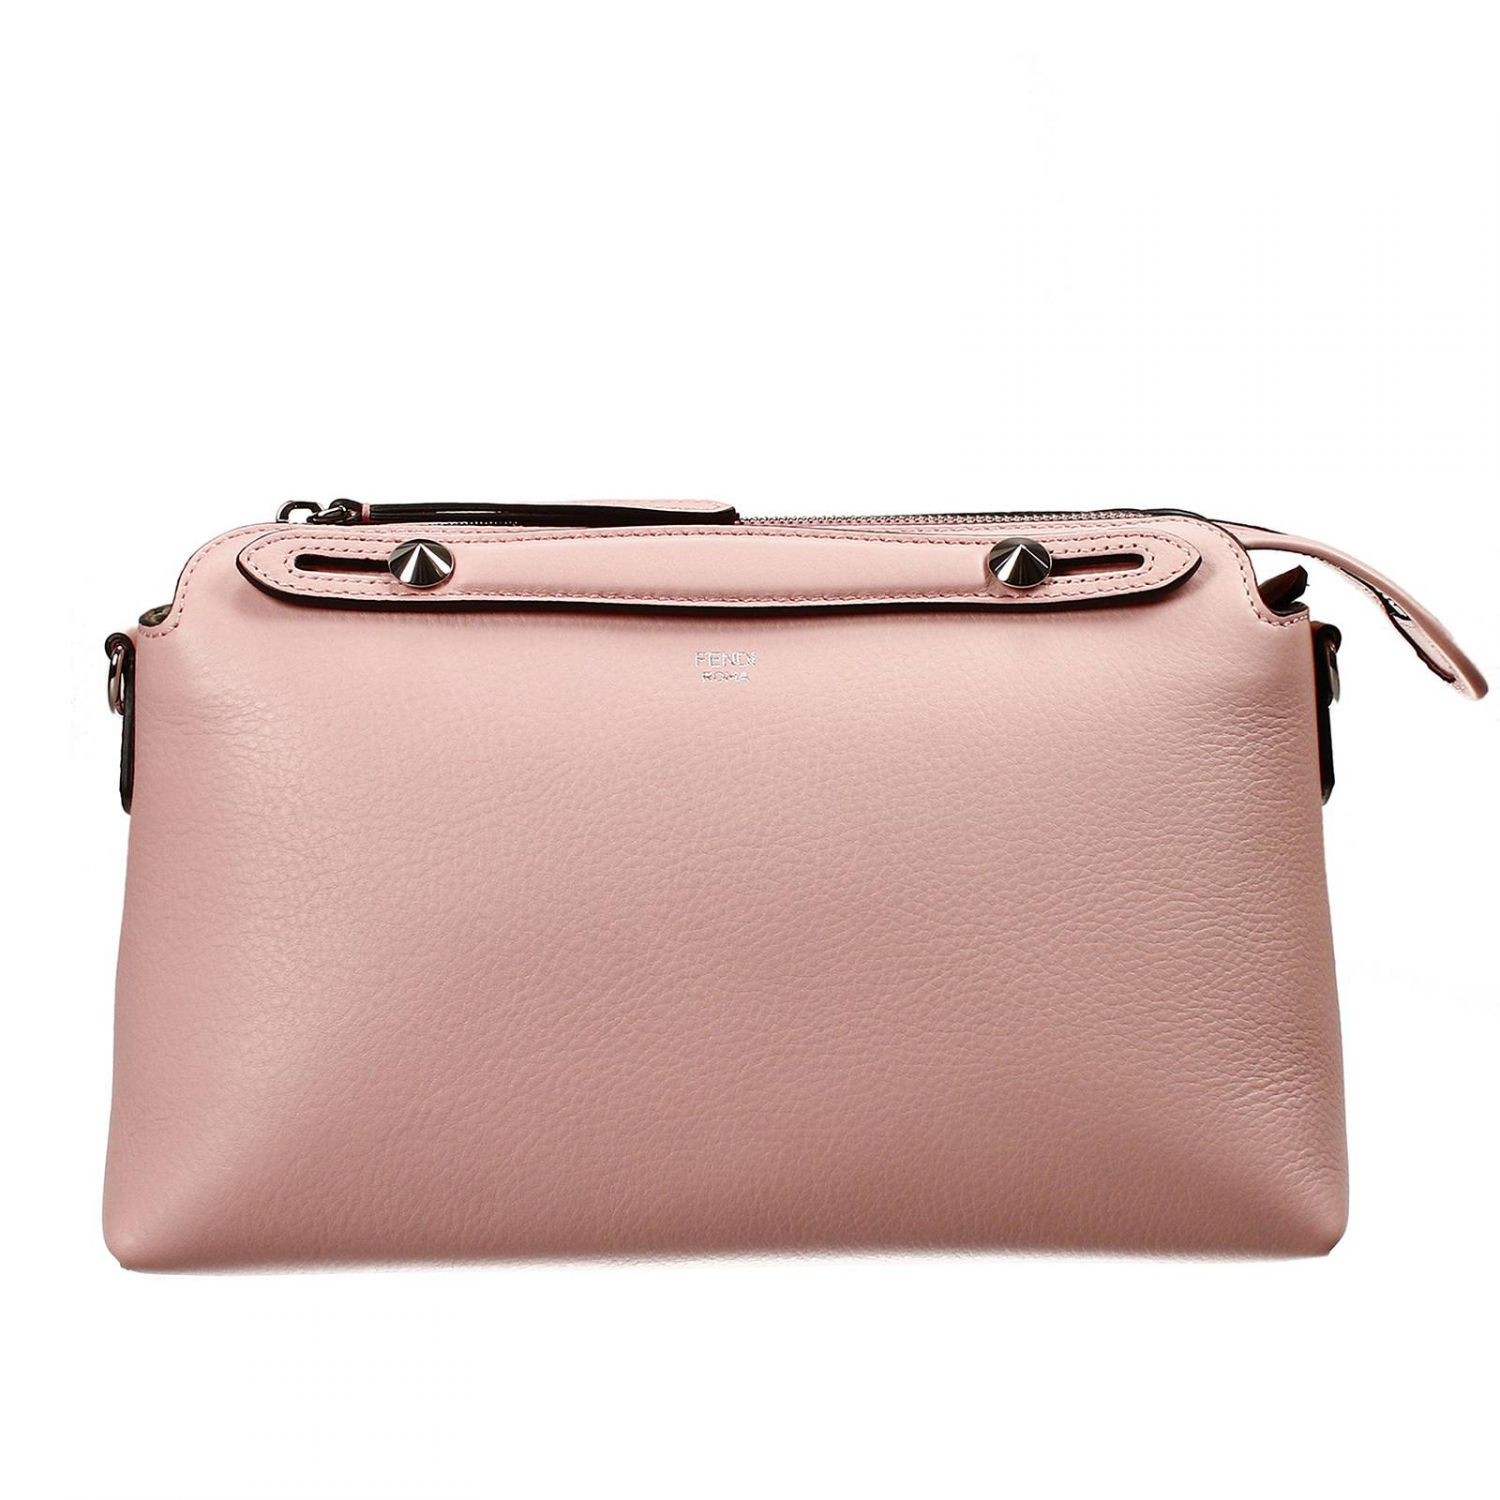 Fendi | Pink Clutch Bag By The Way Duffle Small Leather | Lyst